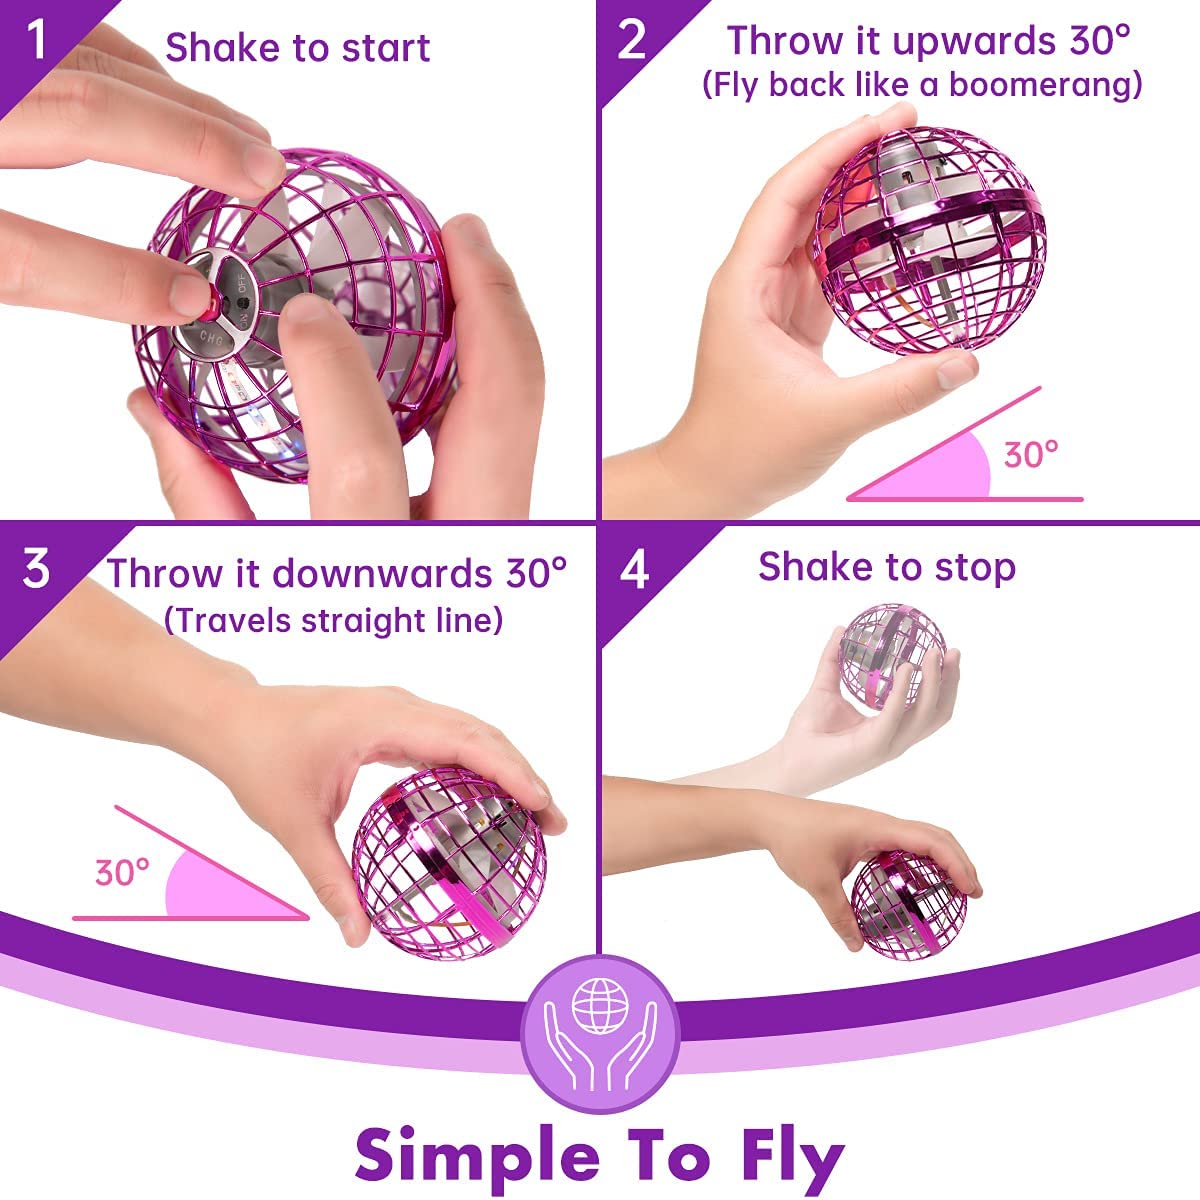 【Toys】Flynova Pro Flying Ball - Hand control - Safe for Kids Adult - Indoor and outdoor